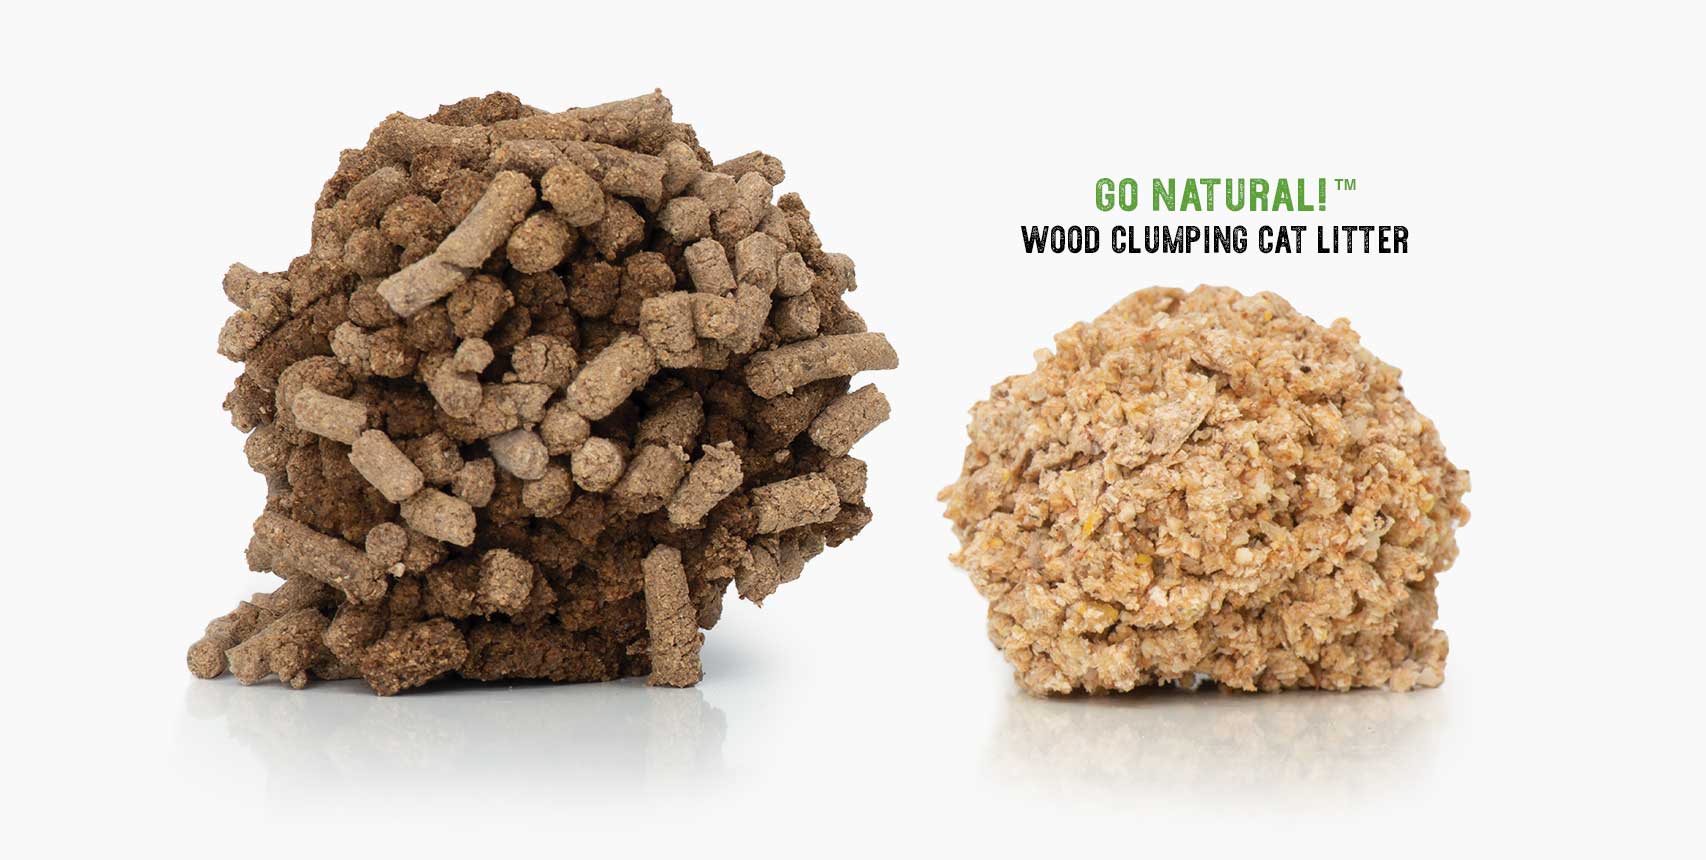 Go Natural Wood Clumping Cat Litter lasts longer and absorbs more waste